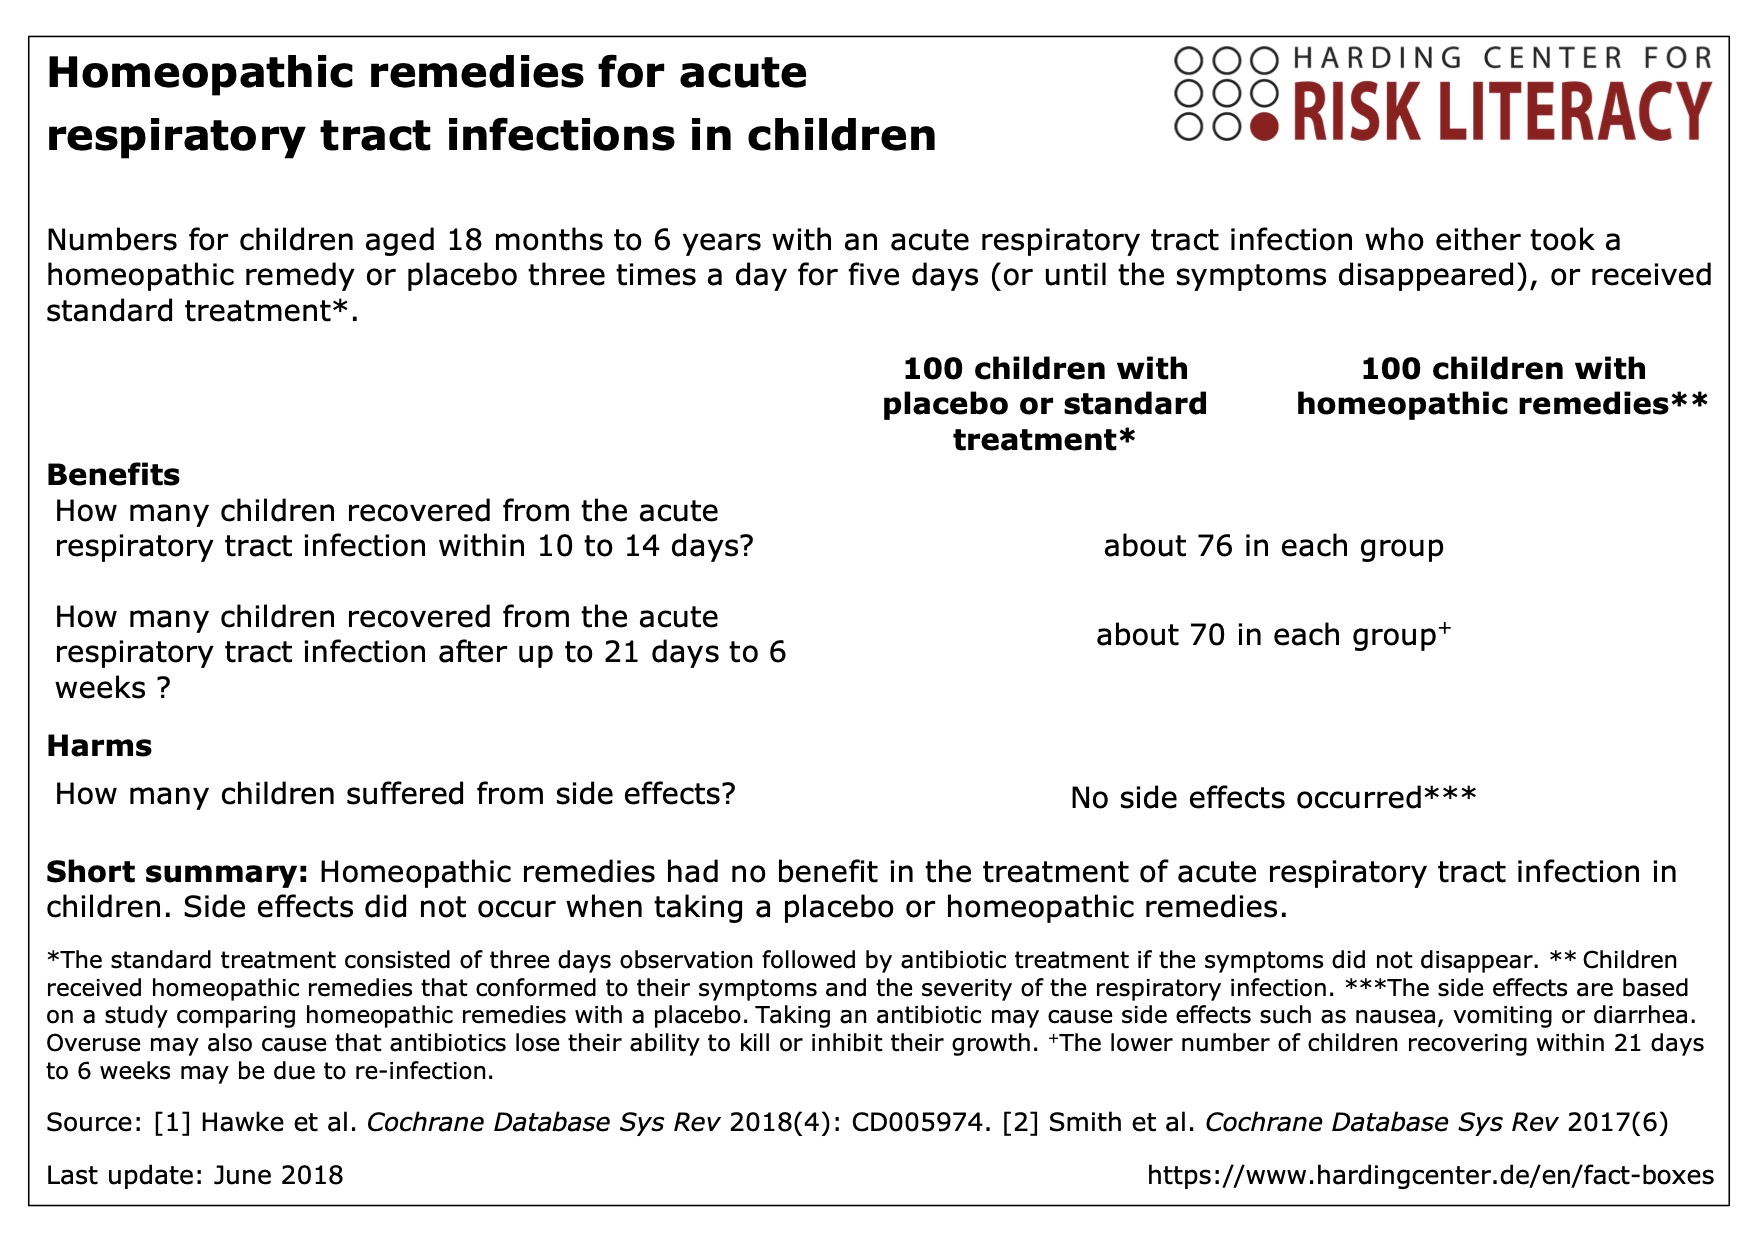 Fact box on homeopathic remedies for acute respiratory tract infections in children